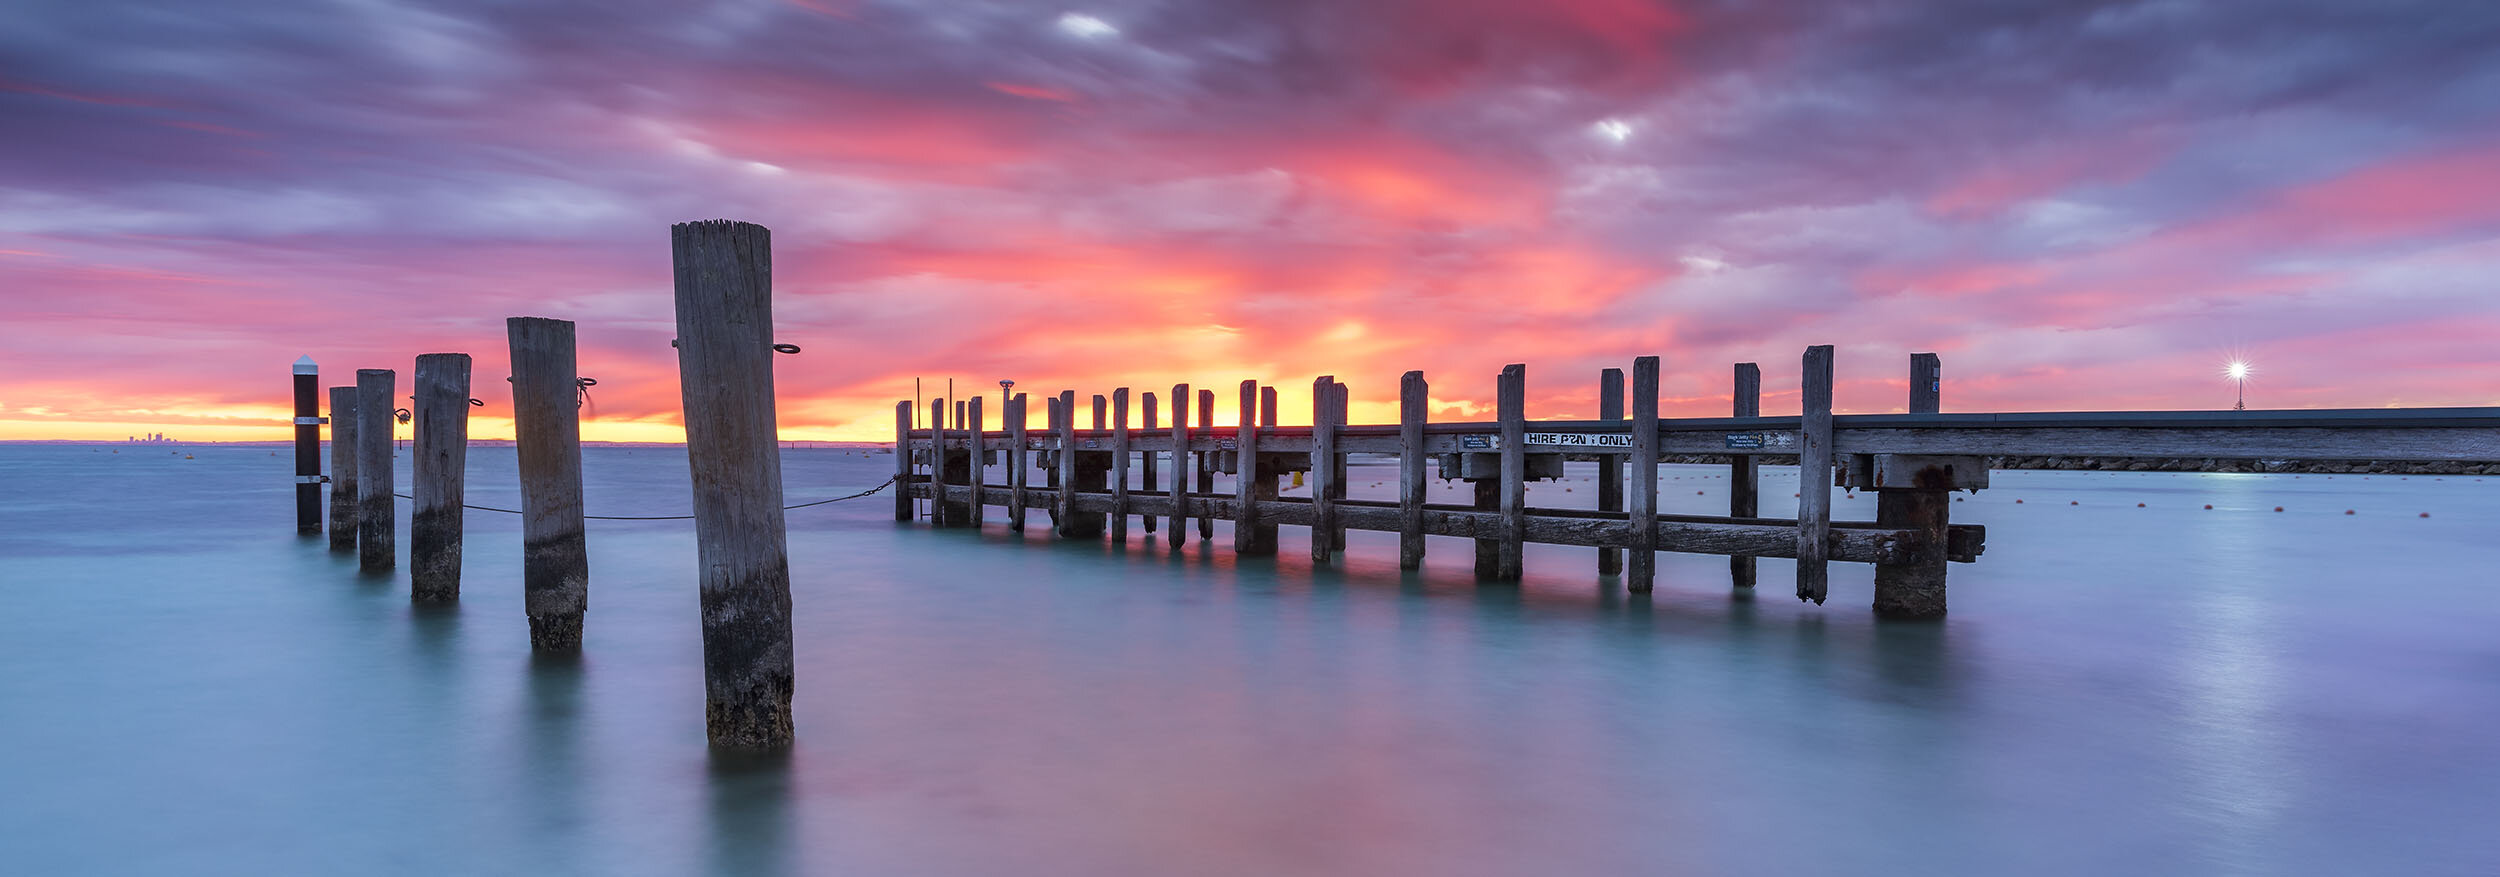 THOMSON BAY - STARK JETTY SPECIAL from $255 AUD